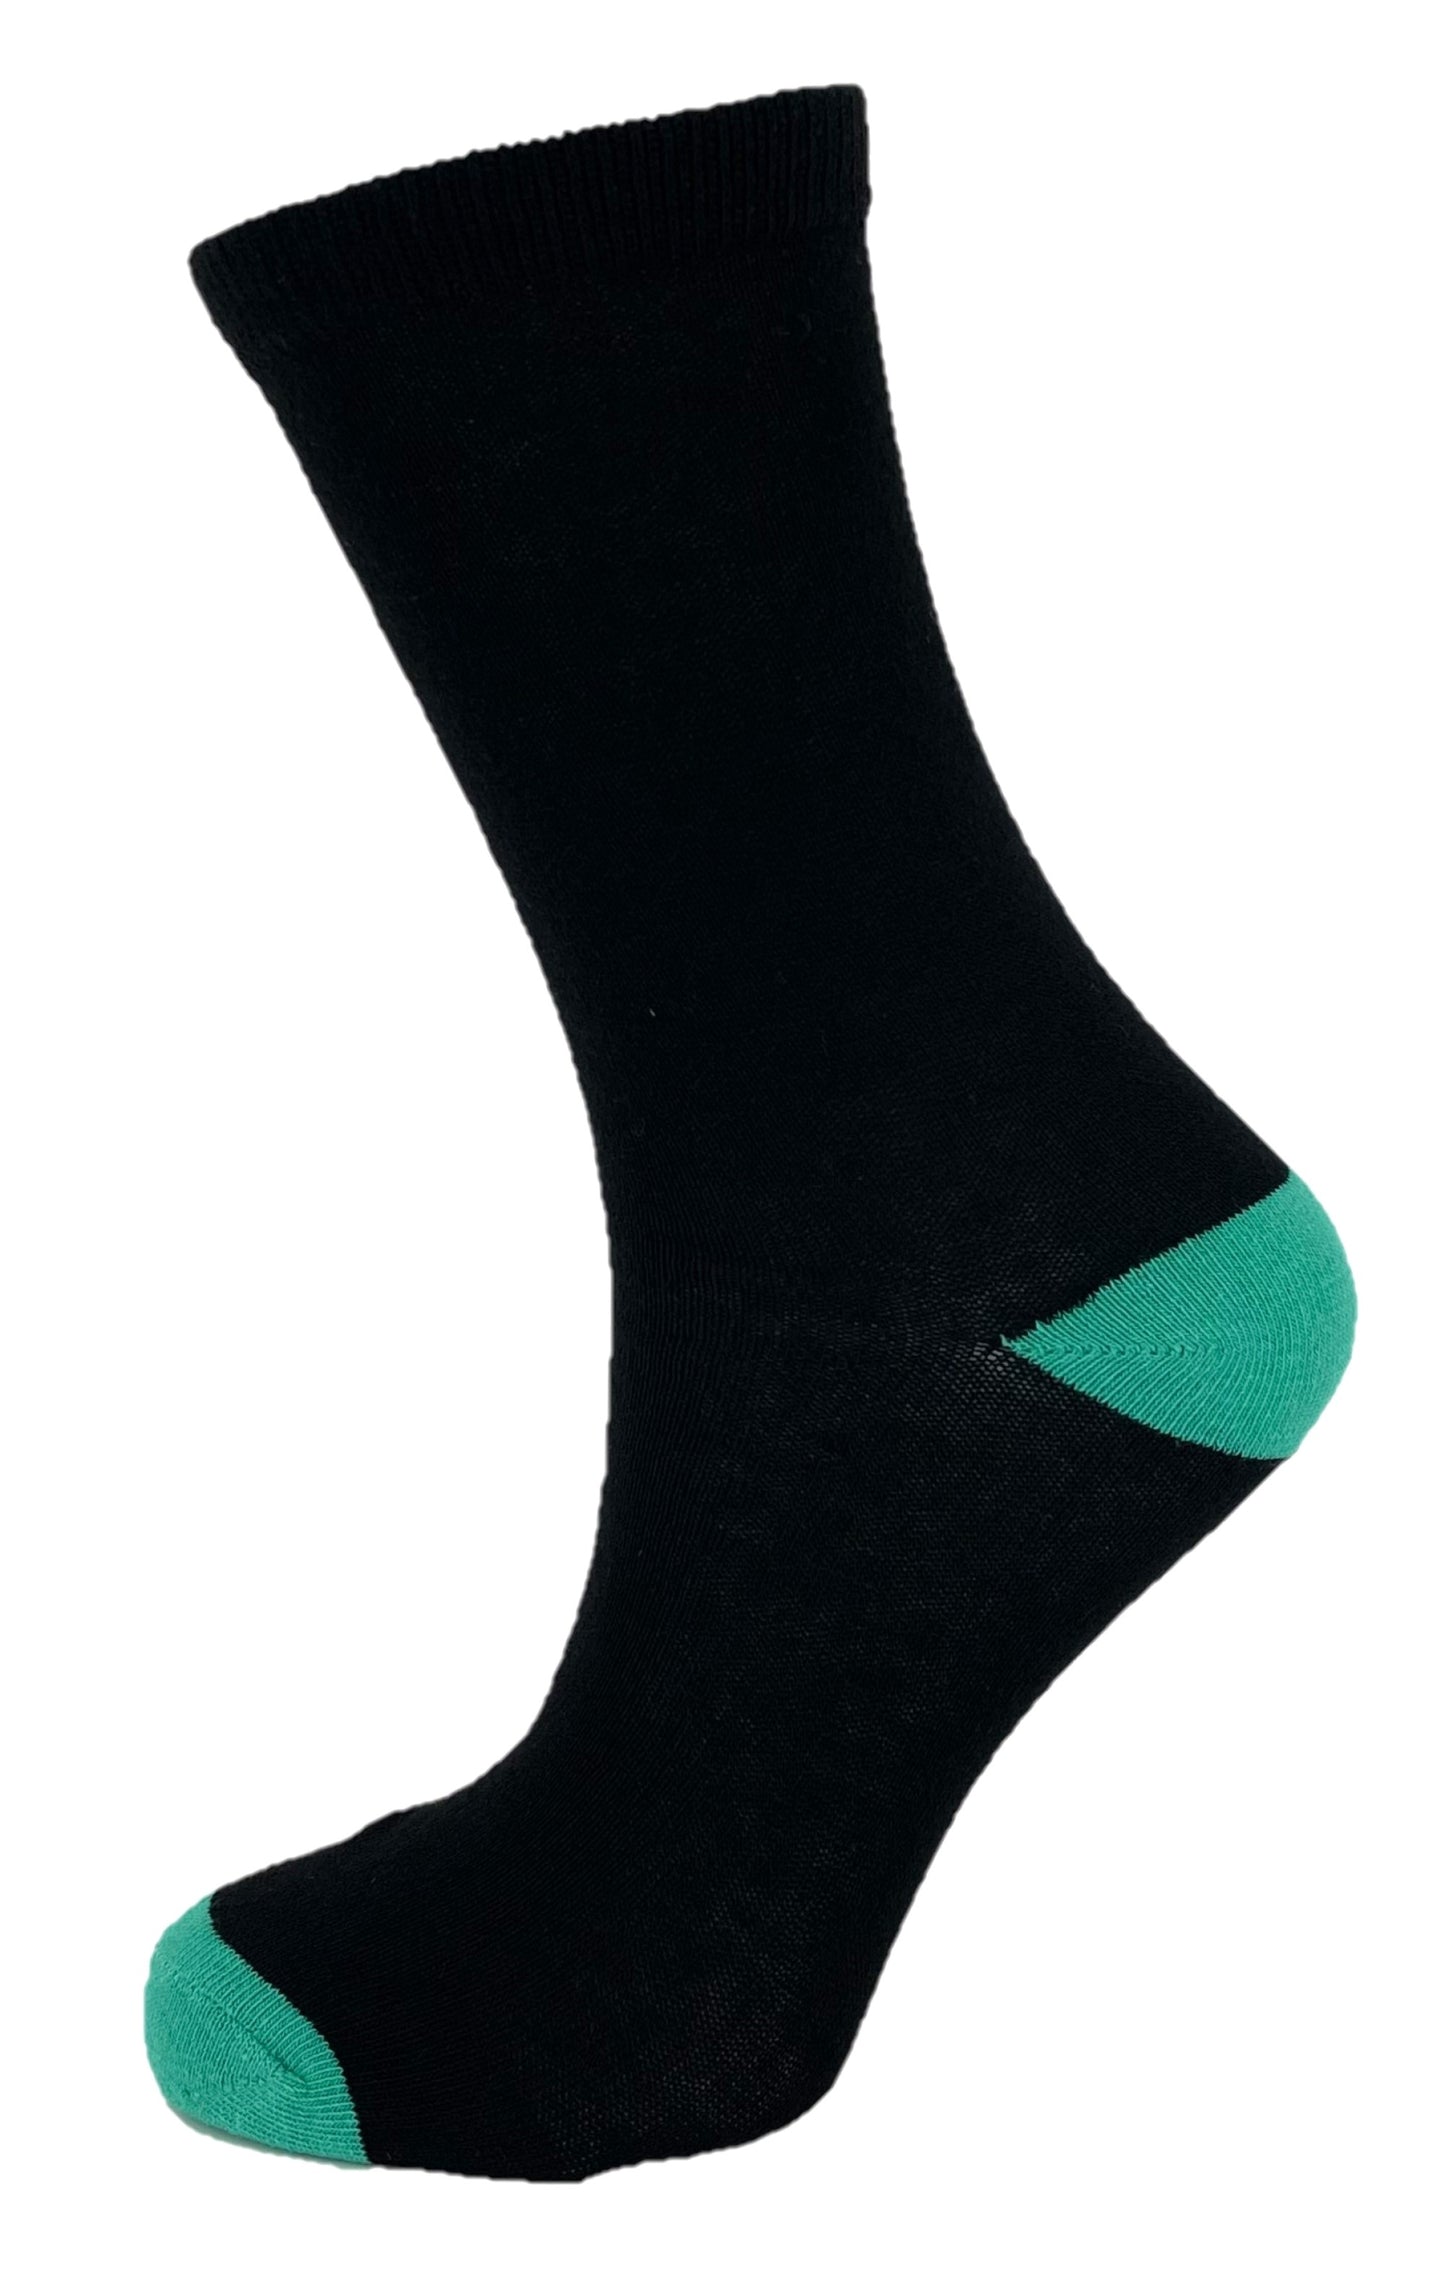 5 Pairs Ladies Cotton Rich Black and Multicoloured Ankle Socks - UK 4-7